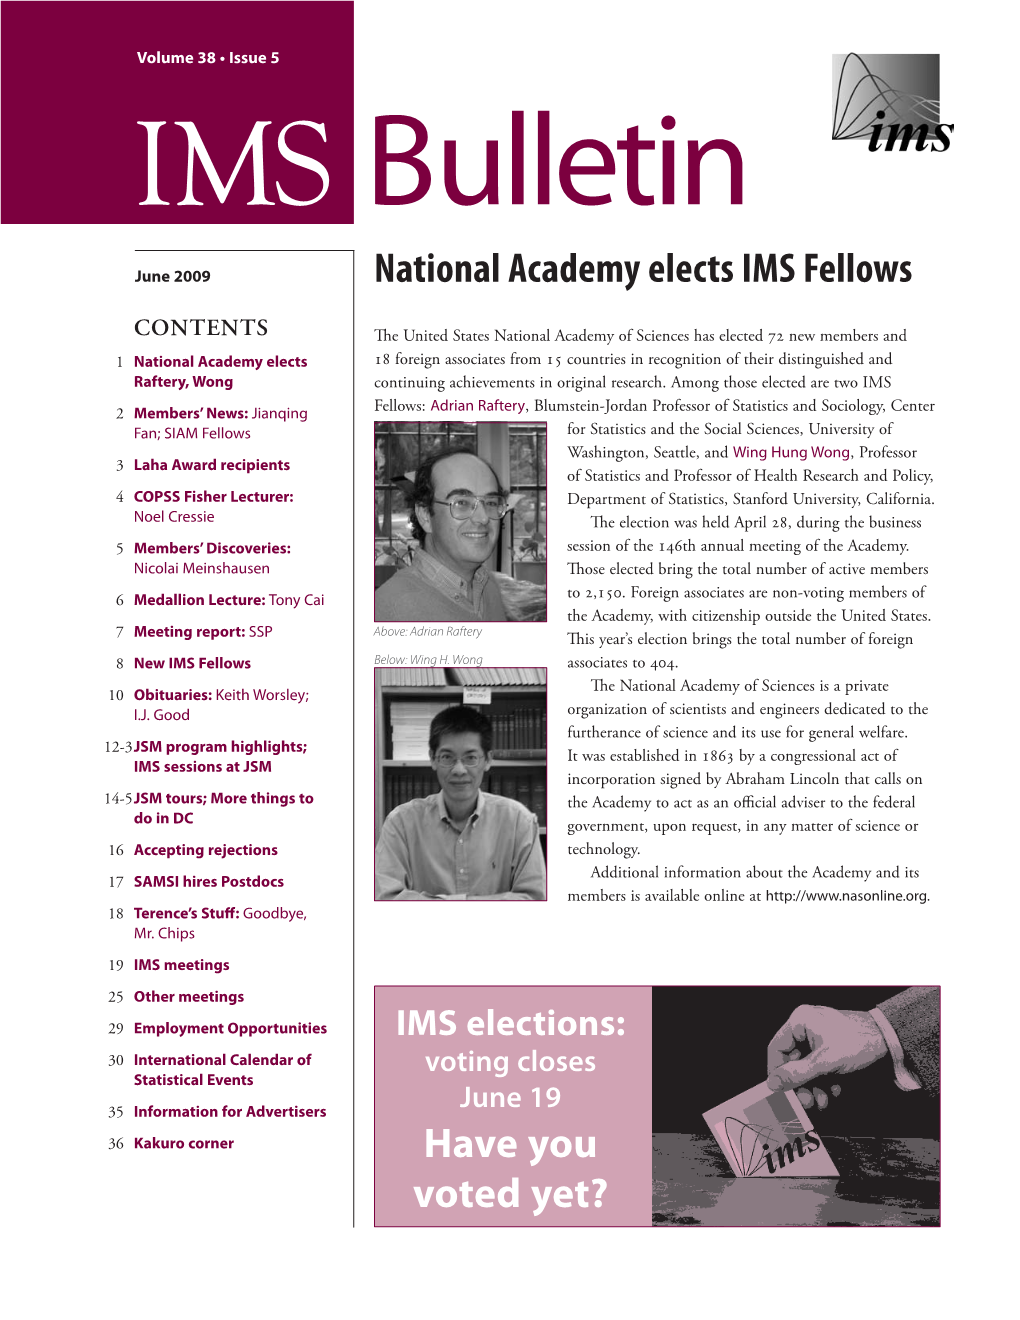 National Academy Elects IMS Fellows Have You Voted Yet?